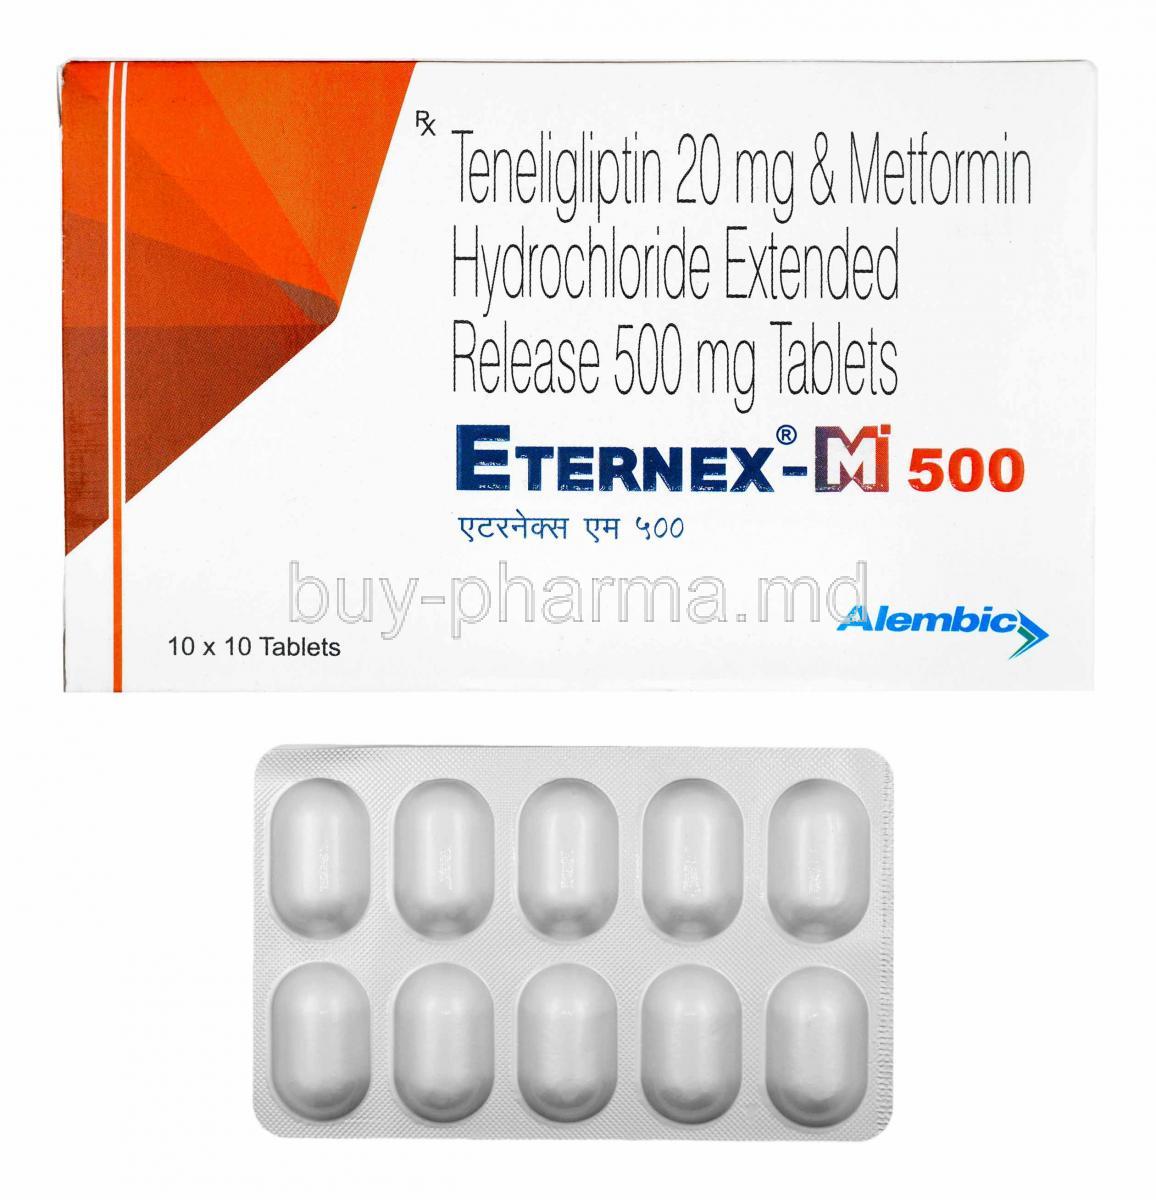 Eternex-M, Metformin and Teneligliptin 500mg, box and tablets